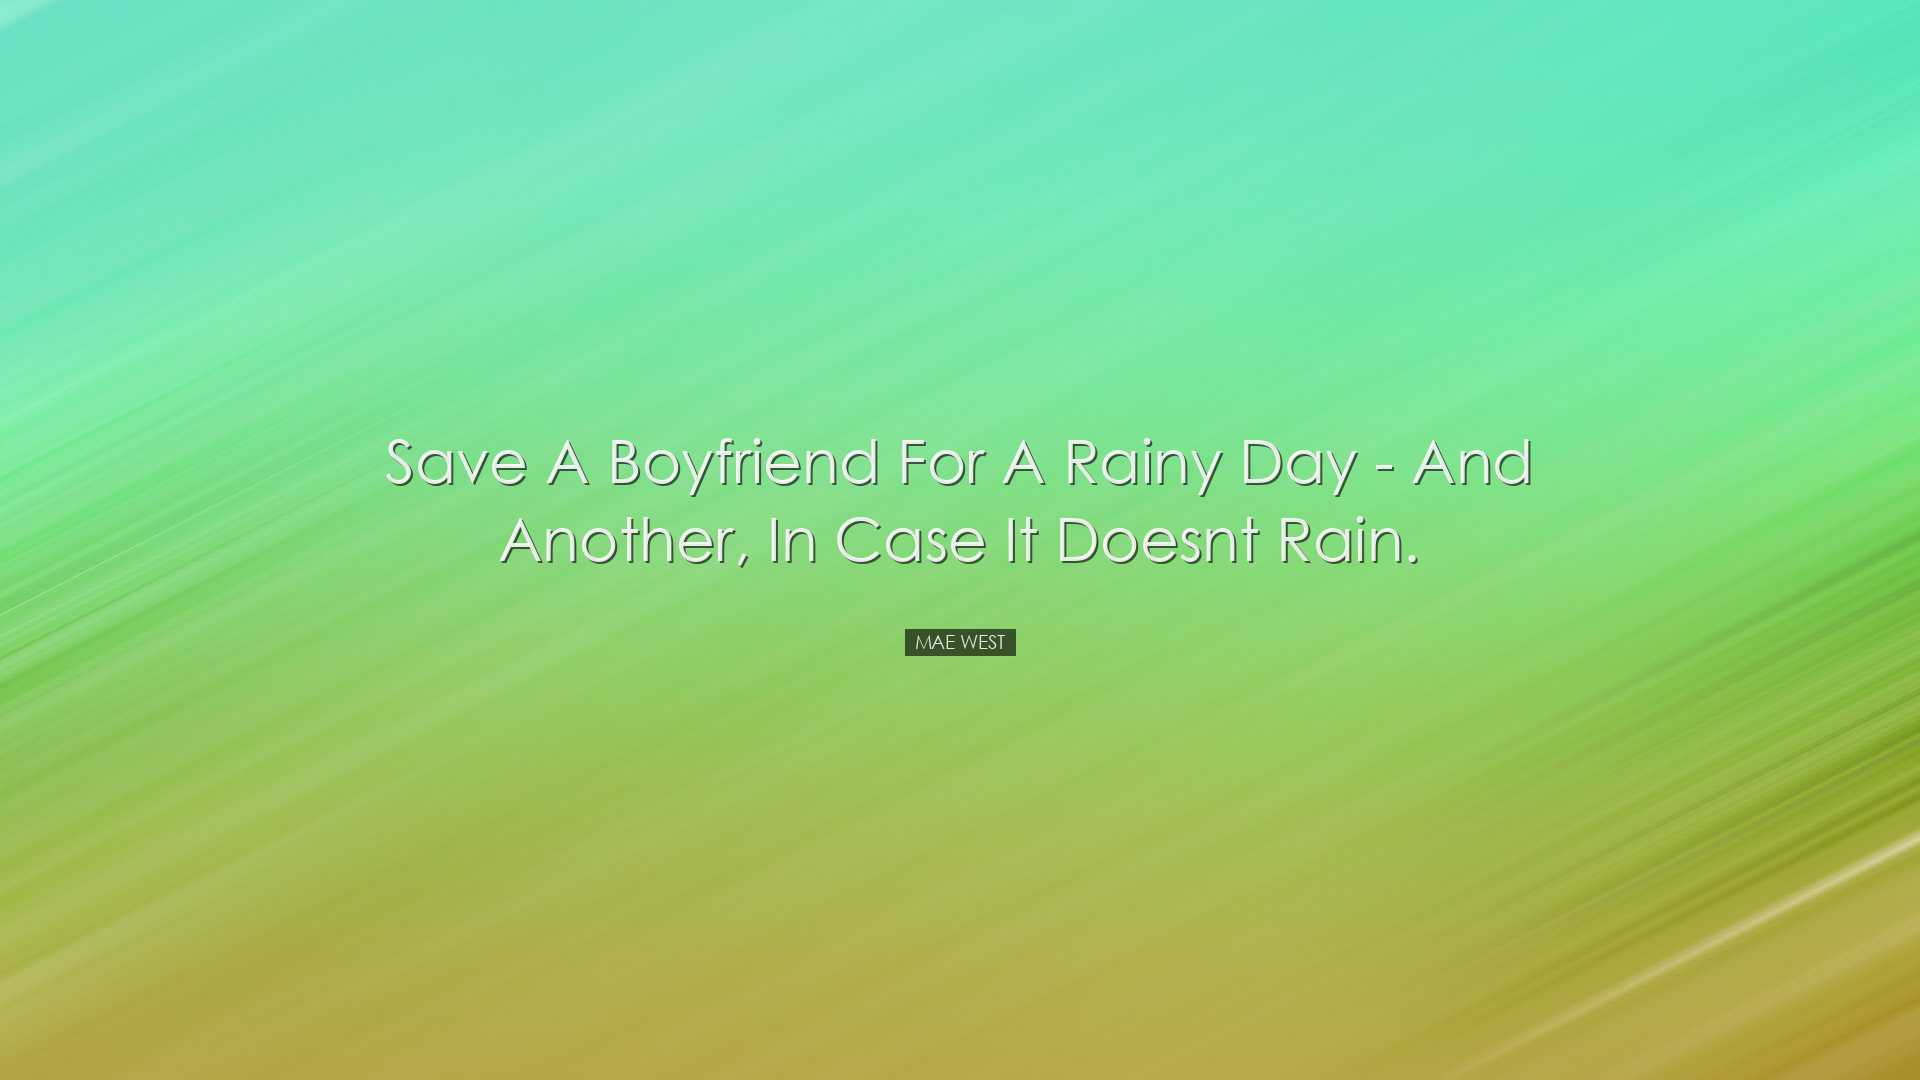 Save a boyfriend for a rainy day - and another, in case it doesnt